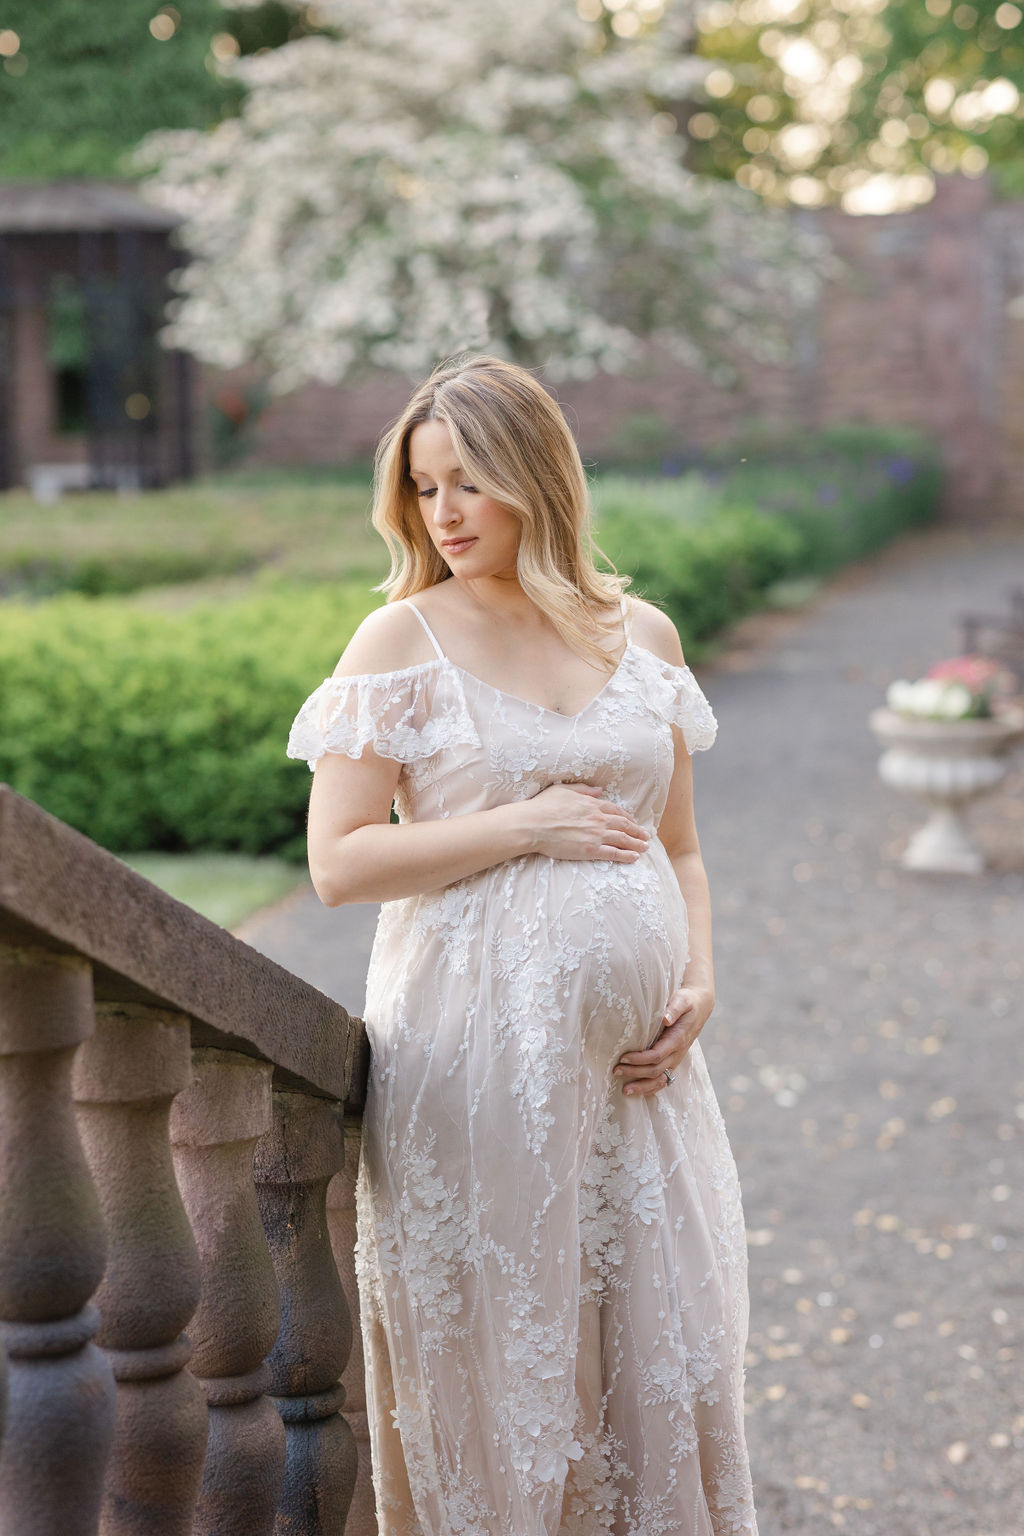 A mom to be stands at the bottom of some stairs in a garden while looking down her shoulder and holding her bump